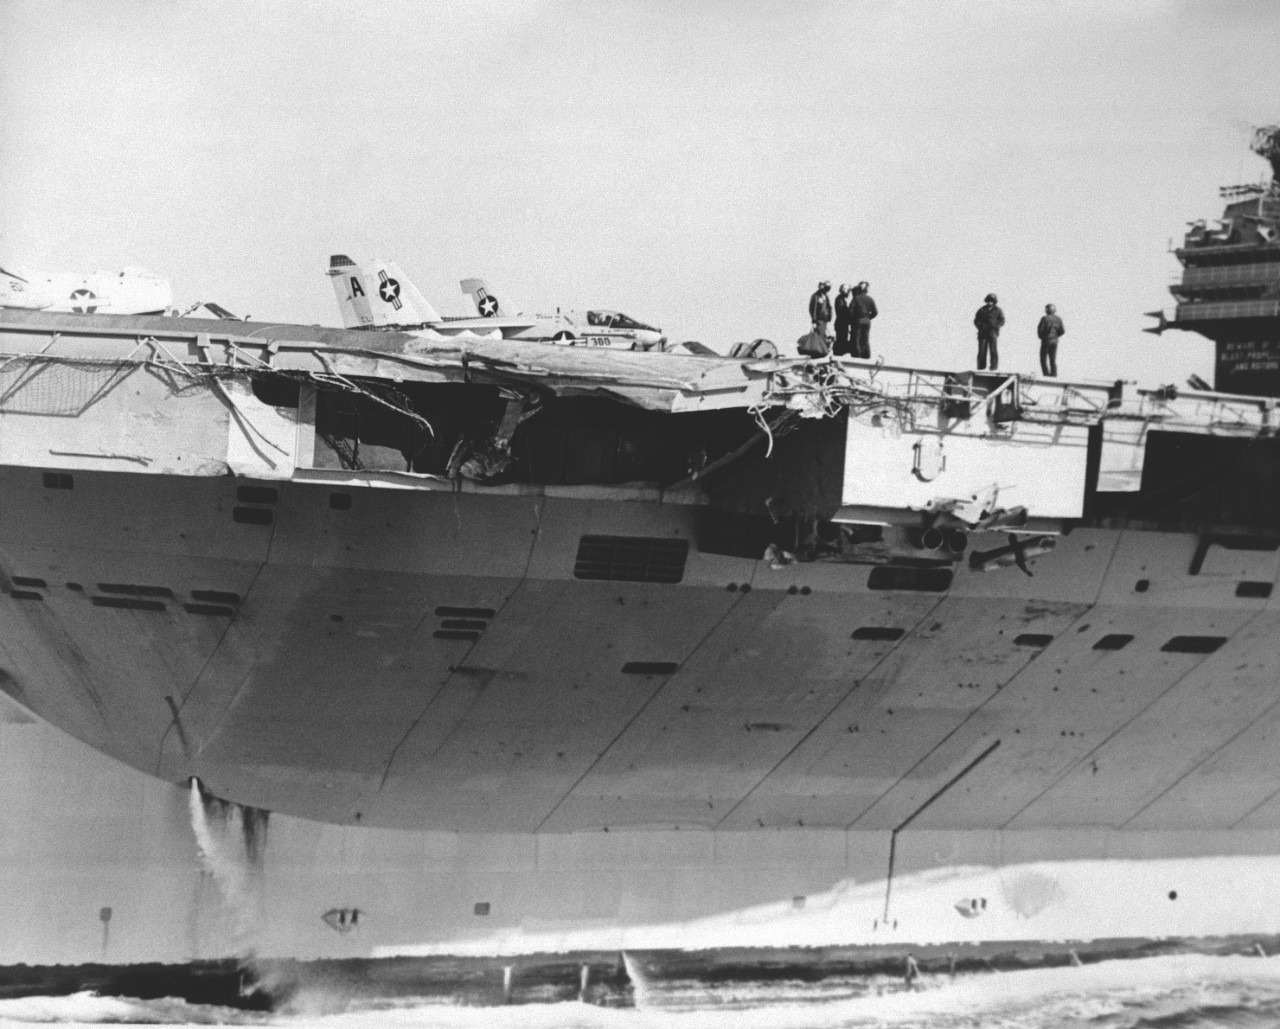 Damaged side of an aircraft carrier in dry dock.